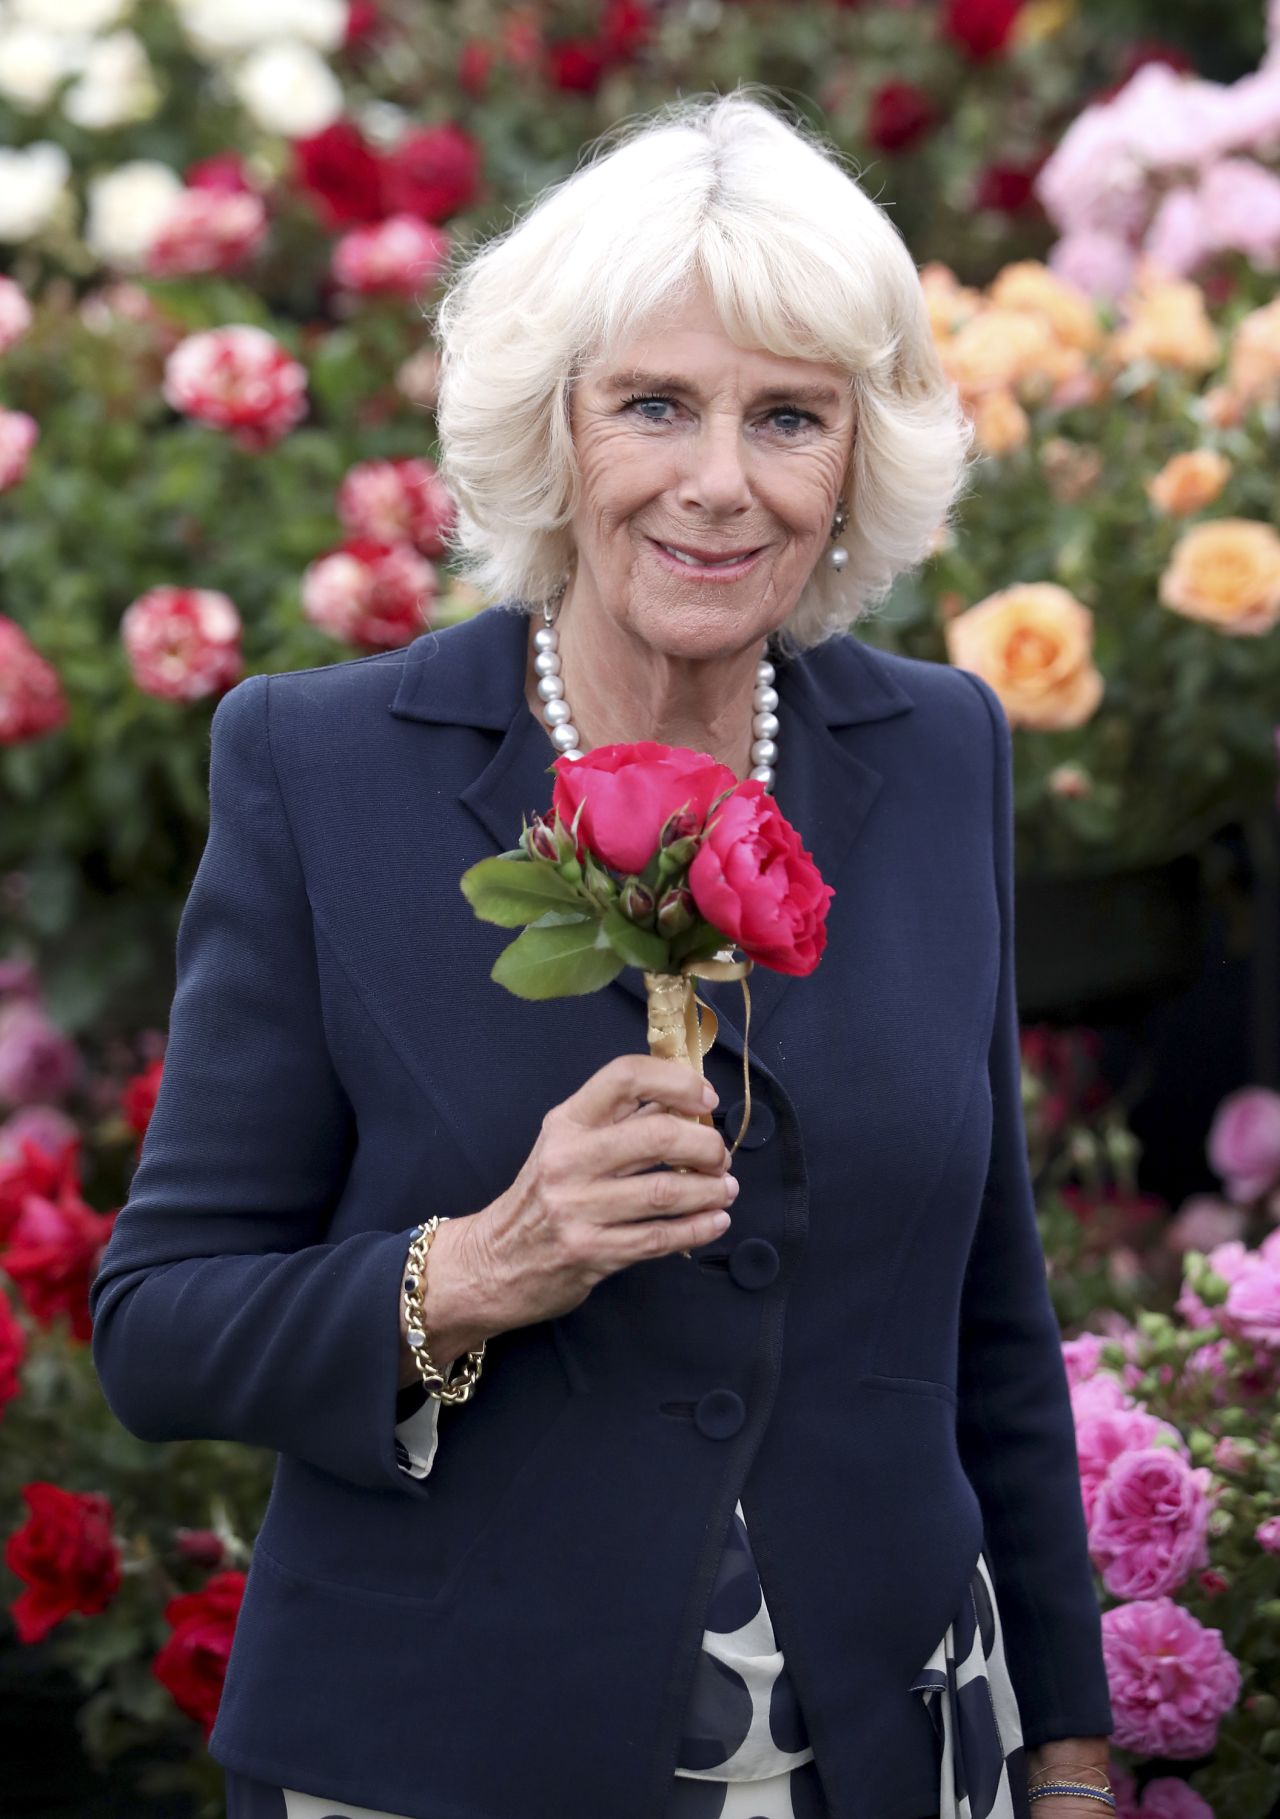 Camilla attends the Sandringham Flower Show in July 2017.